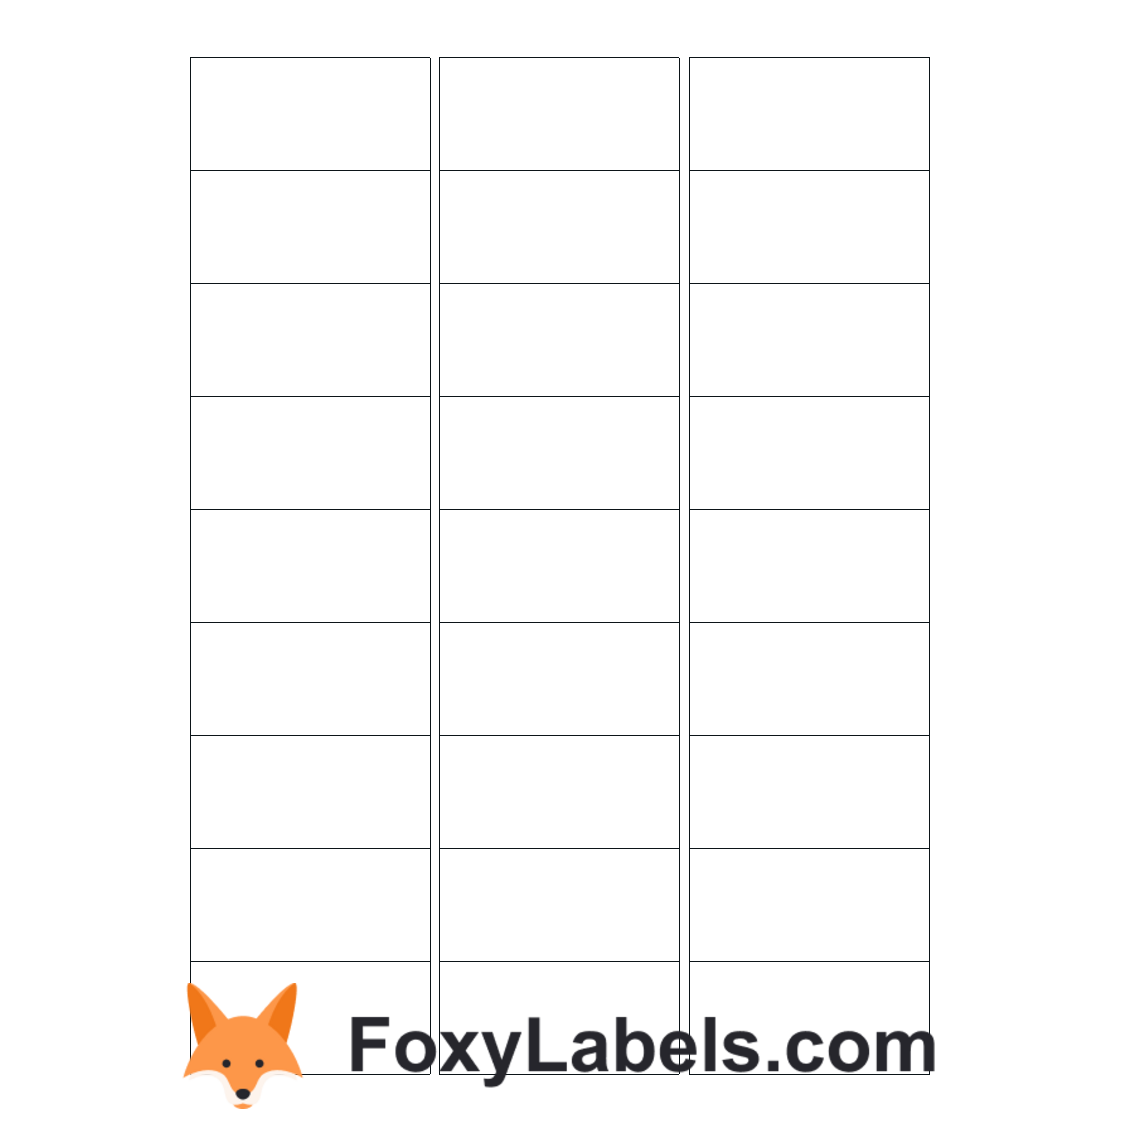 Avery-Zweckform L6003 label template for Google Docs